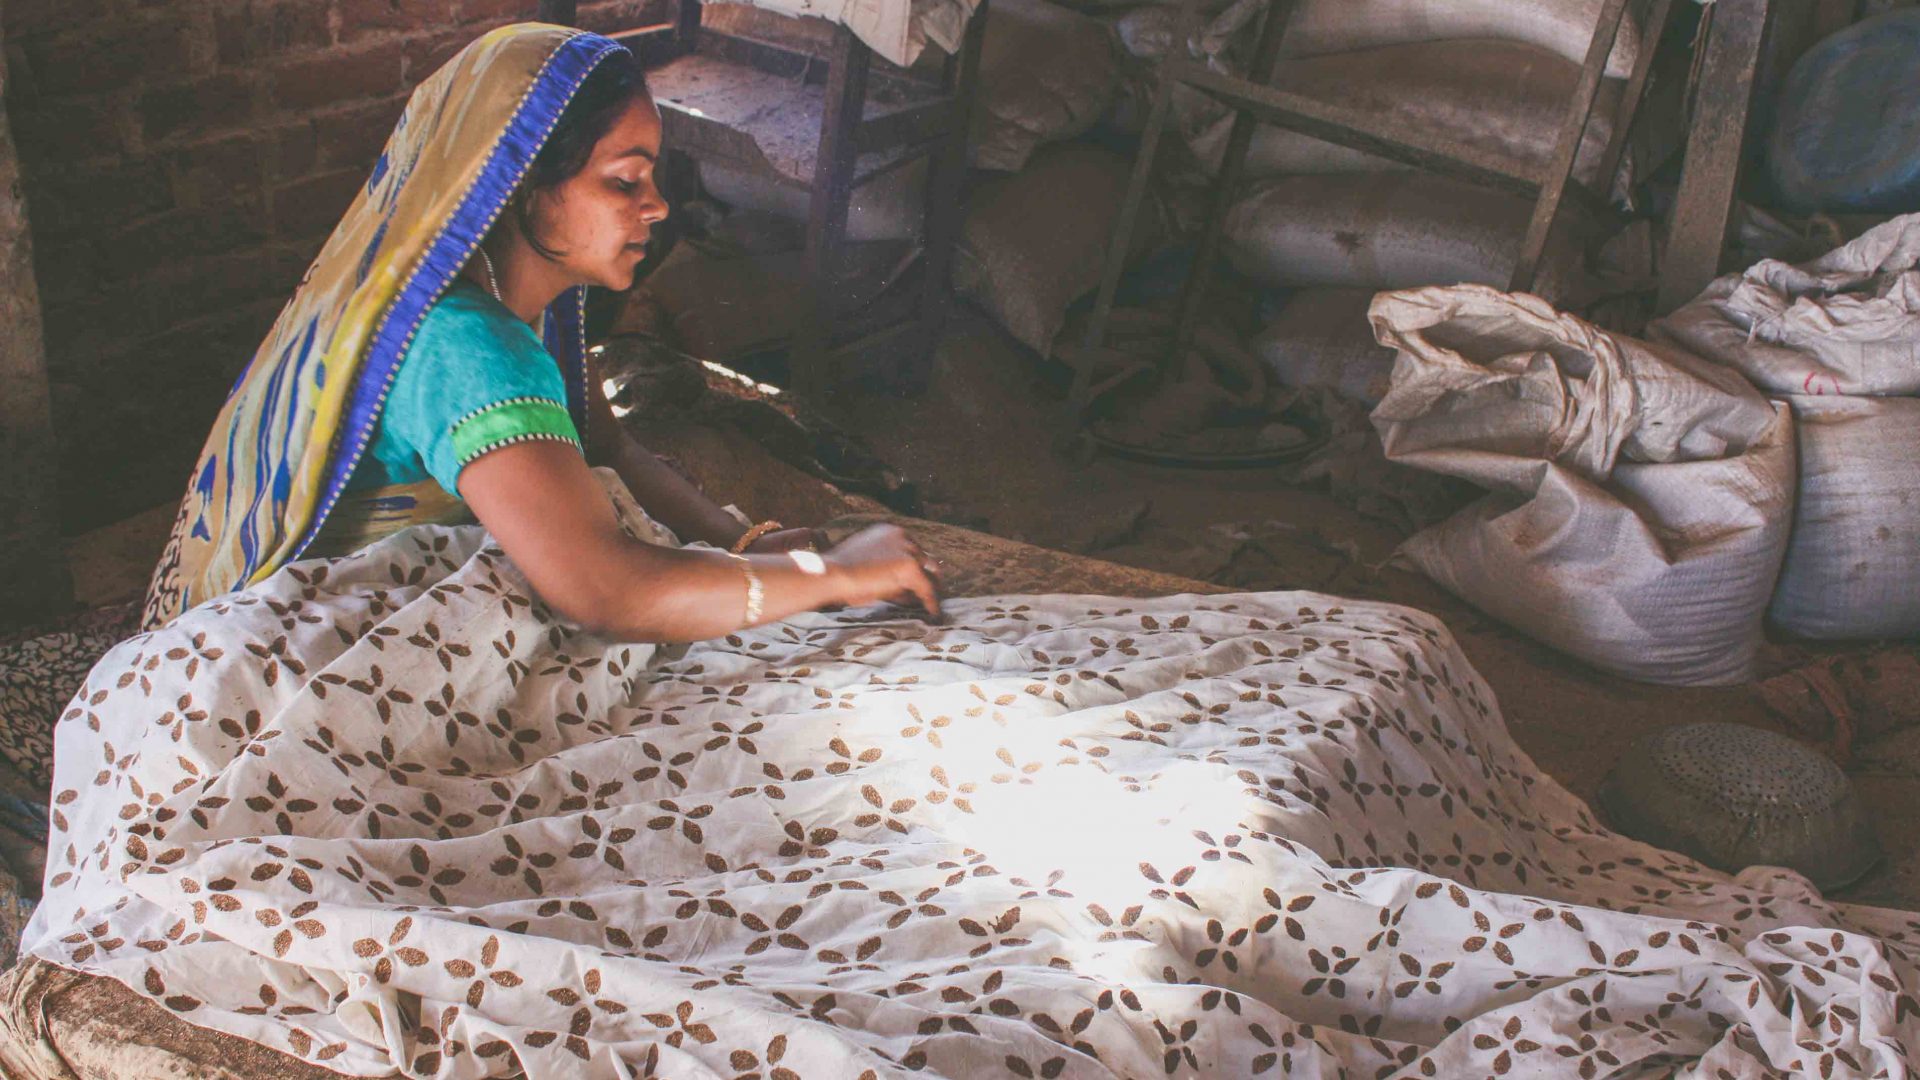 A woman in Bagru prepares textiles which are being printed with traditional blocks in Rajasthan, India.